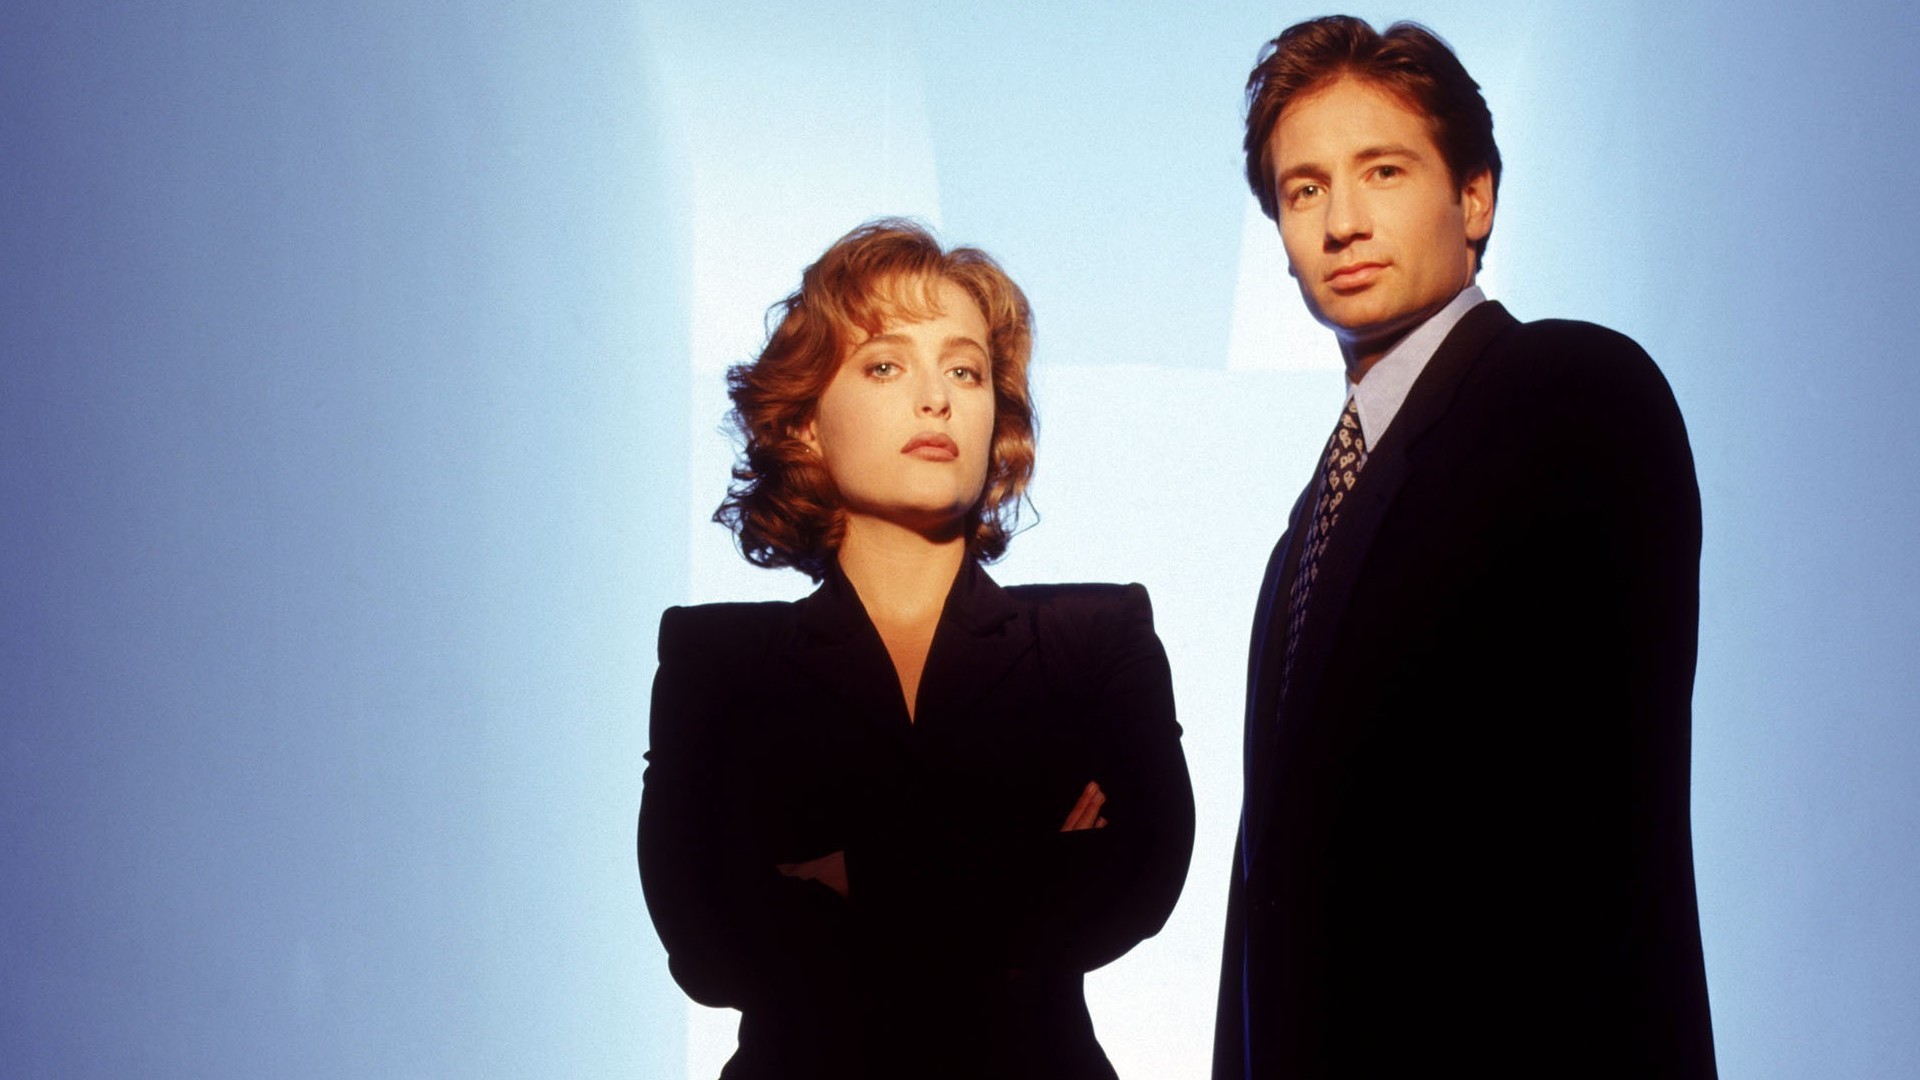 Images of The X-Files | 1920x1080